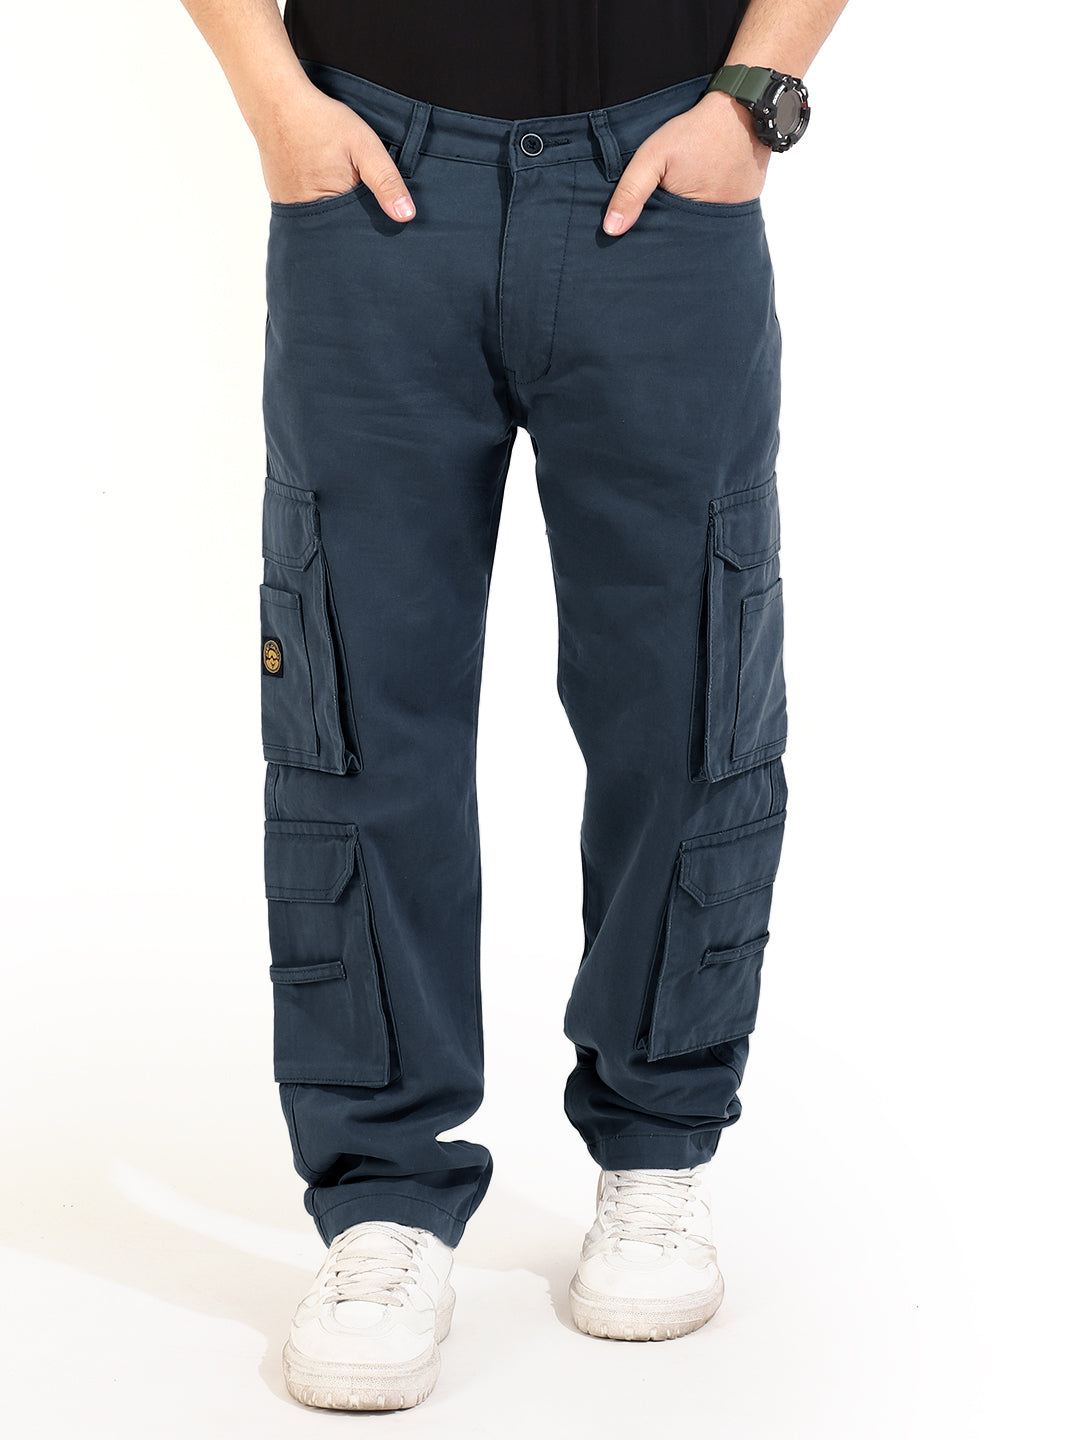 Cadet Blue Cotton Drill 8 pocket Baggy Fit Cargo